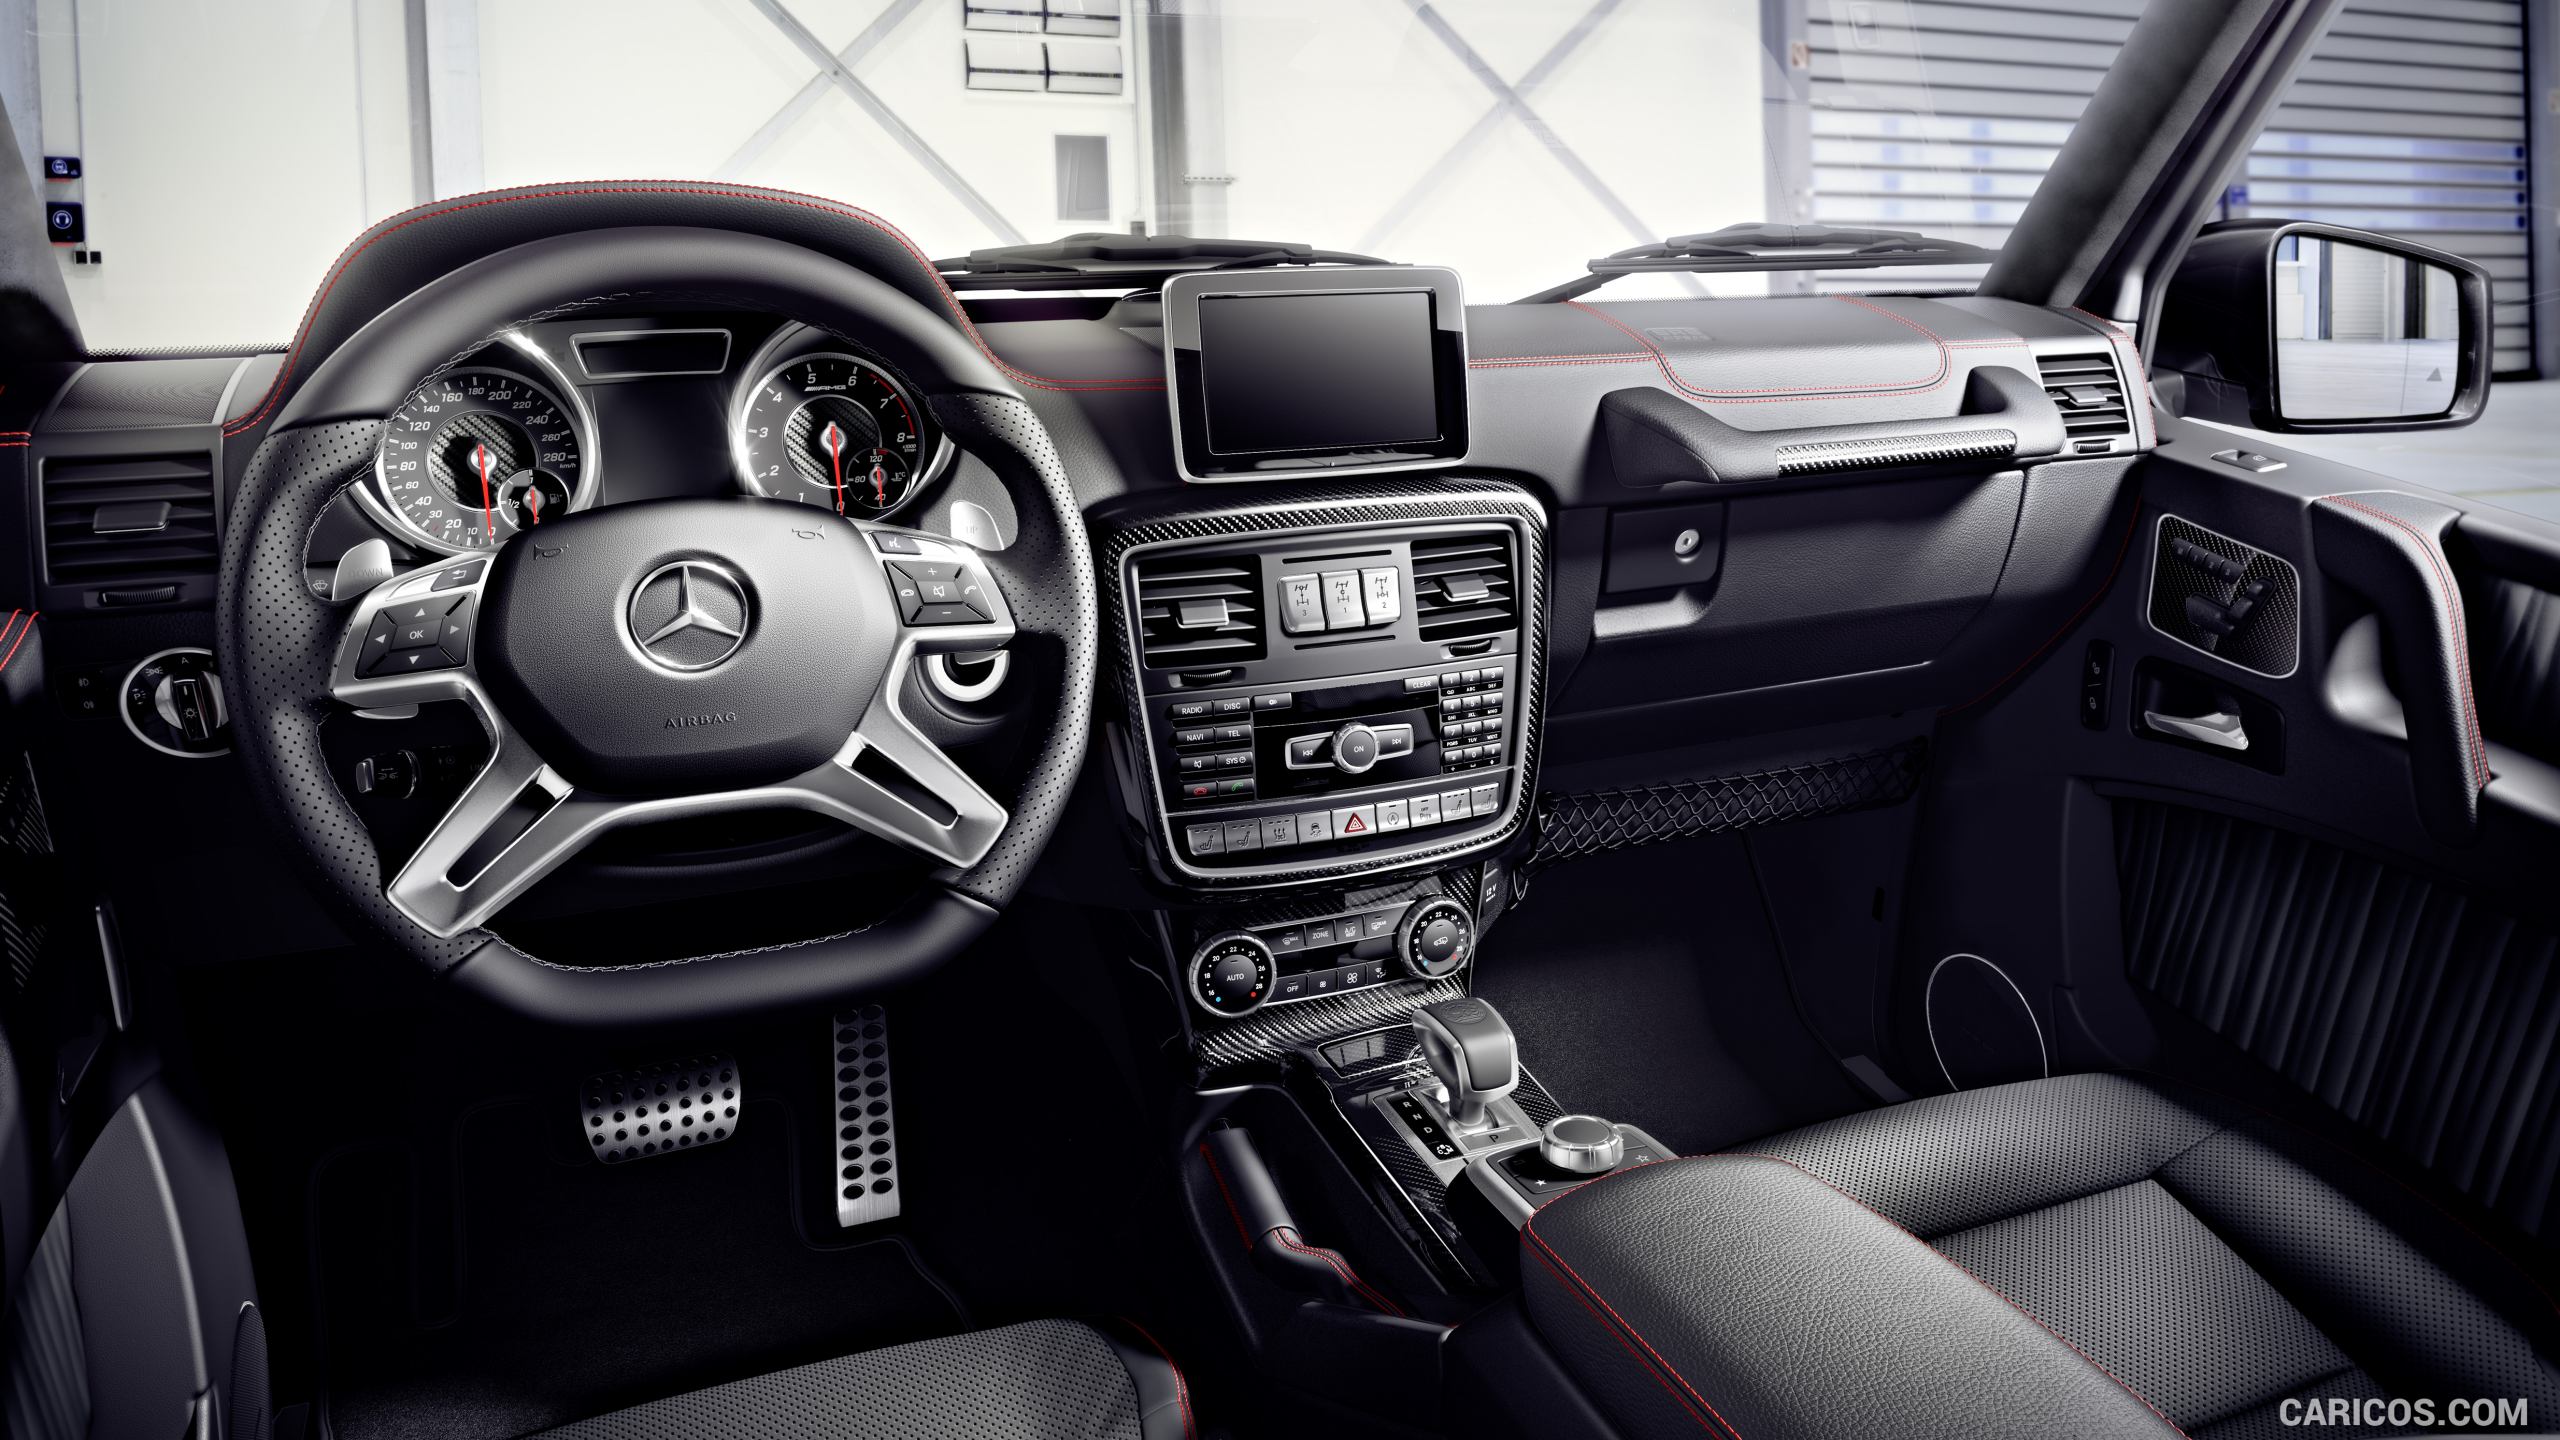 2016 Mercedes-Benz G-Class (Tomato Red) - Interior, #8 of 131